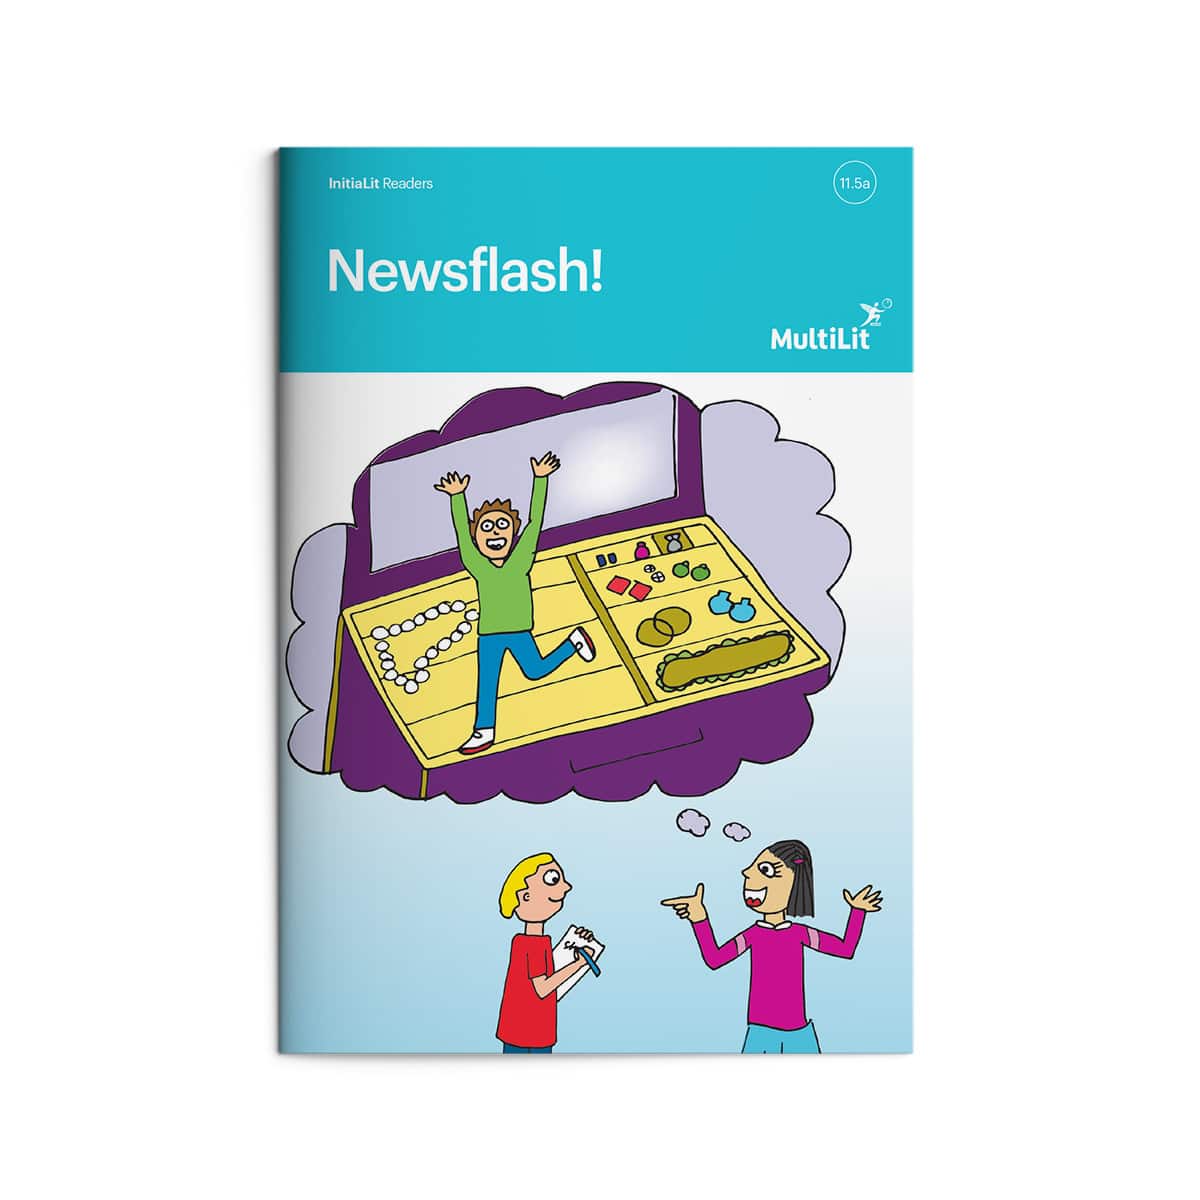 Initialit Reader 115a Newsflash Multilit